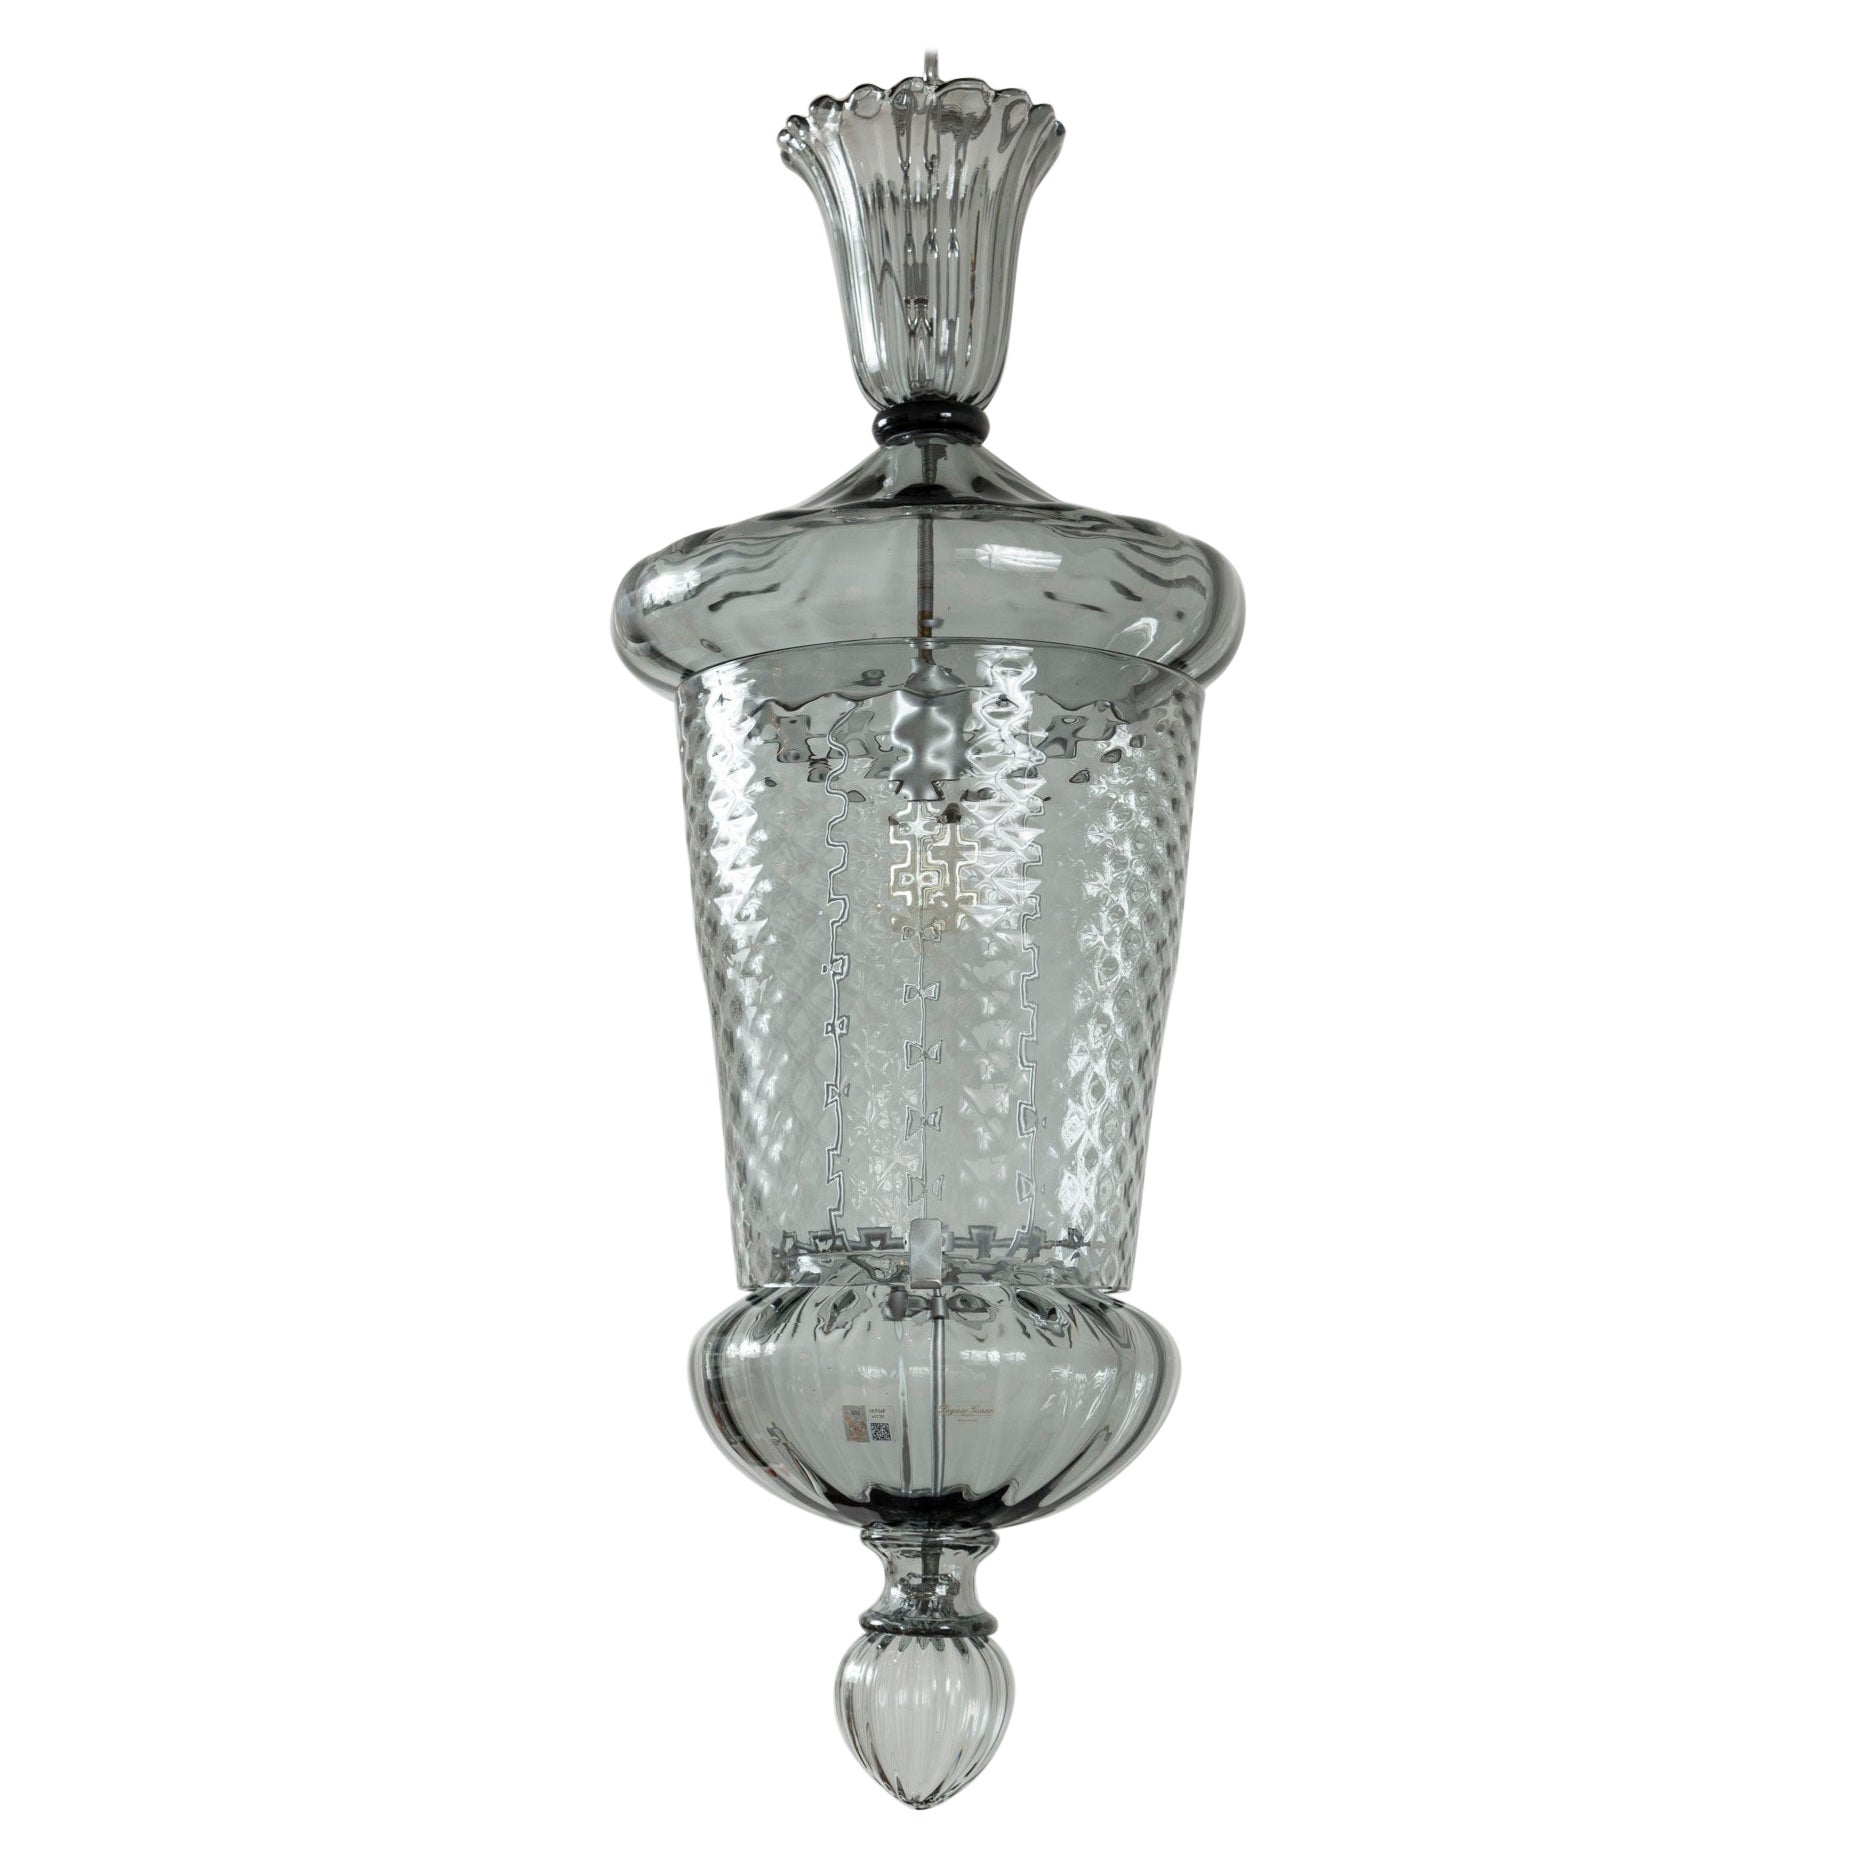 A very beautiful  large grey Venetian  lantern  composed of six seperately blown pieces.  Tapered cylindrical body blown in a textured diamond shaped/ baloton pattern.
Recently re wired for one E26 bulb, high wattage possible with use of dimmable